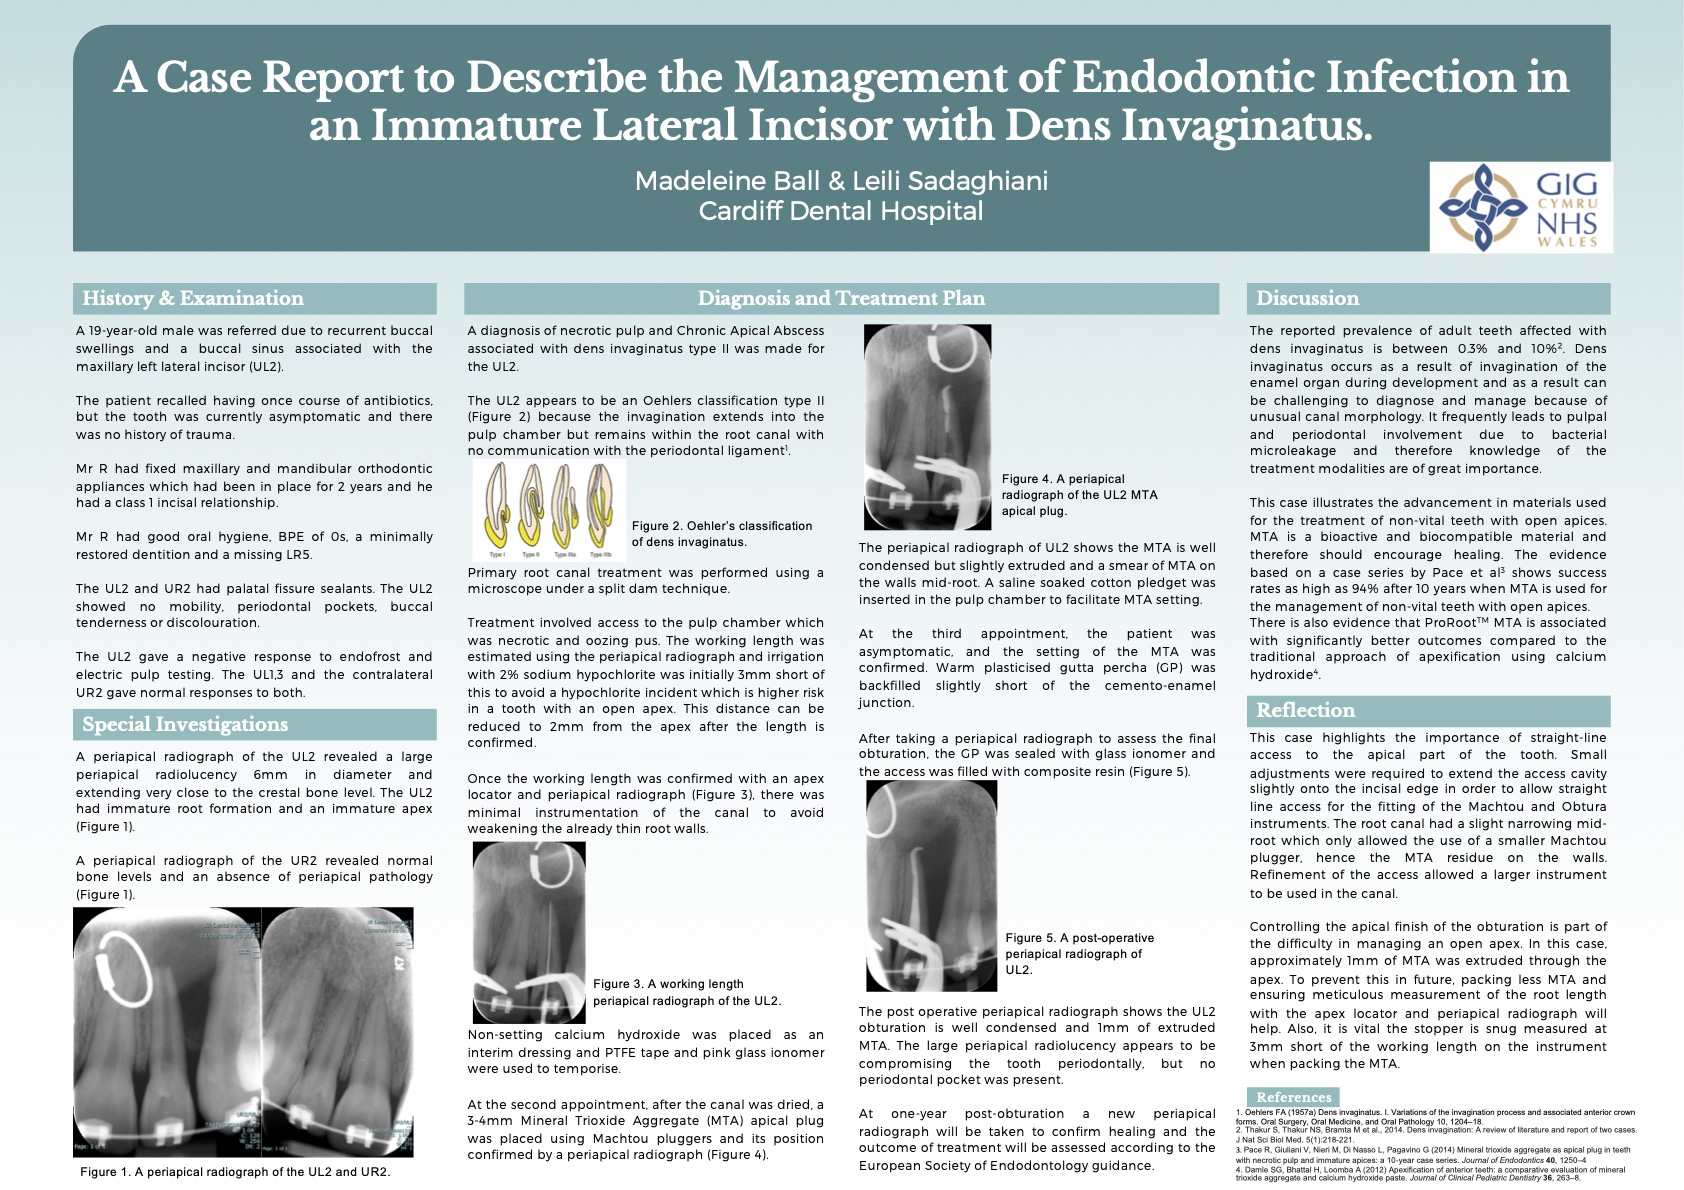 Poster A case report to describe the management of endodontic infection in an immature lateral incisor with dens invaginatus.